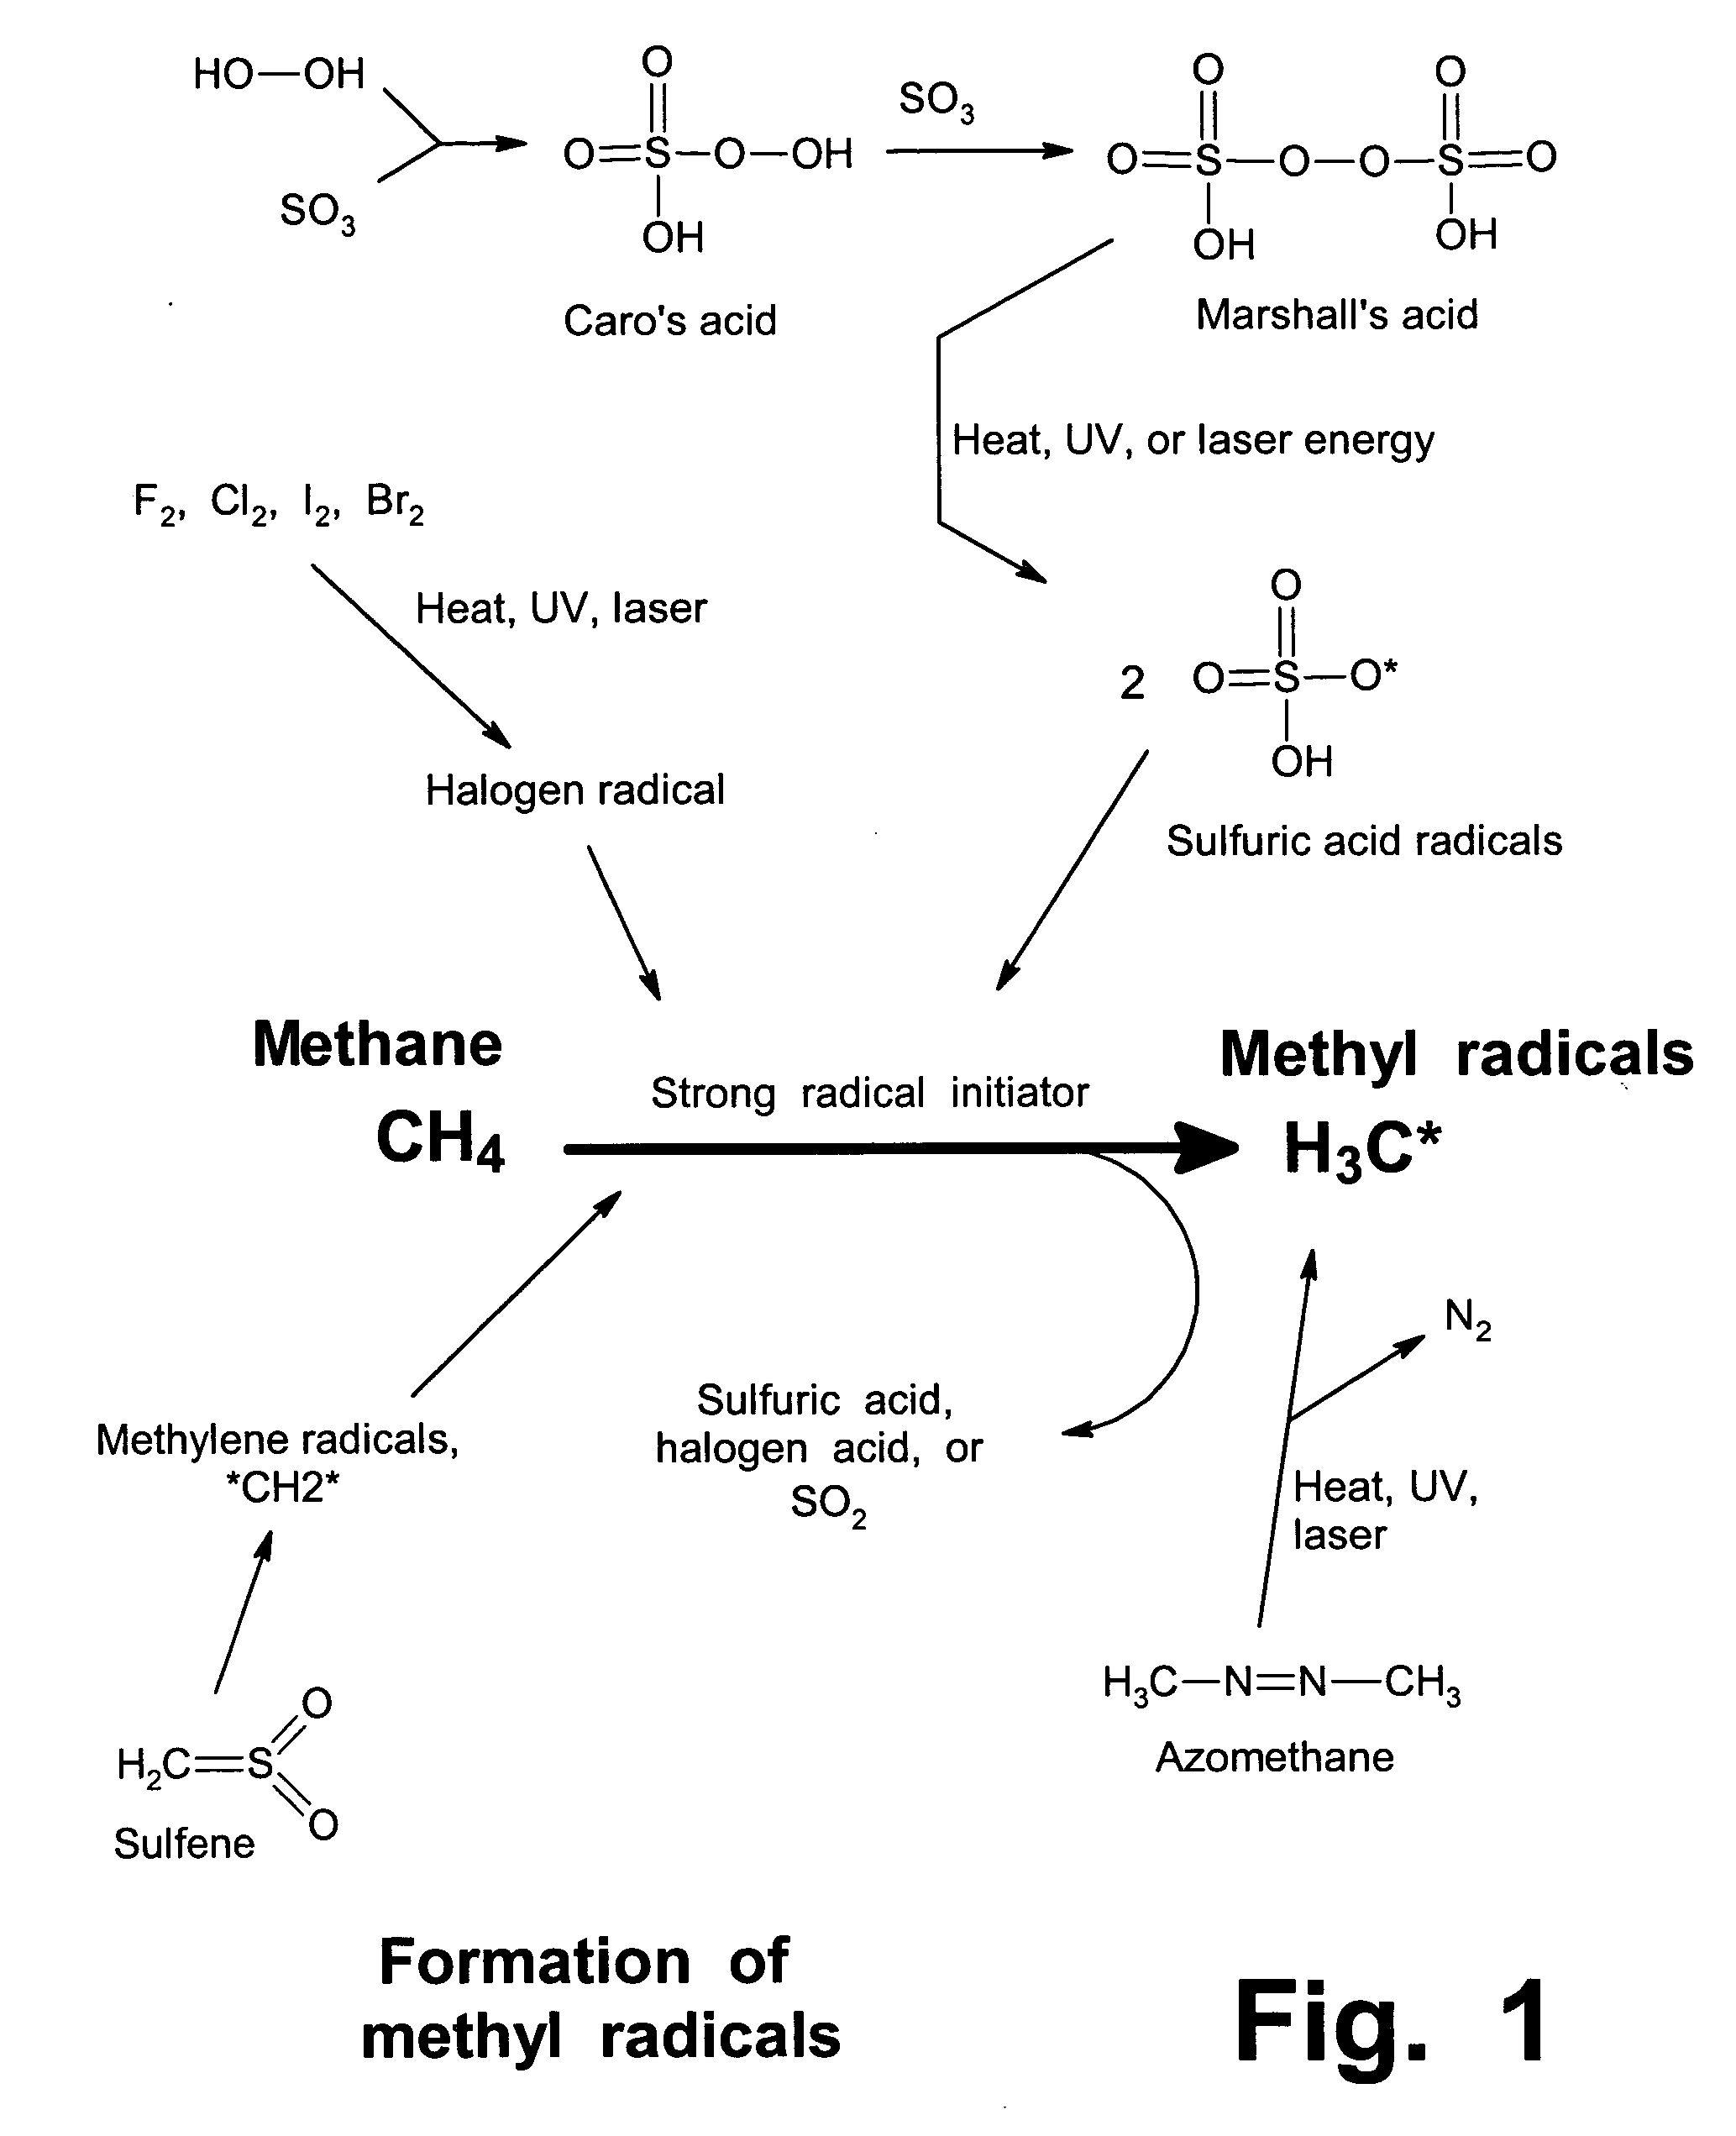 Anhydrous processing of methane into methane-sulfonic acid, methanol, and other compounds